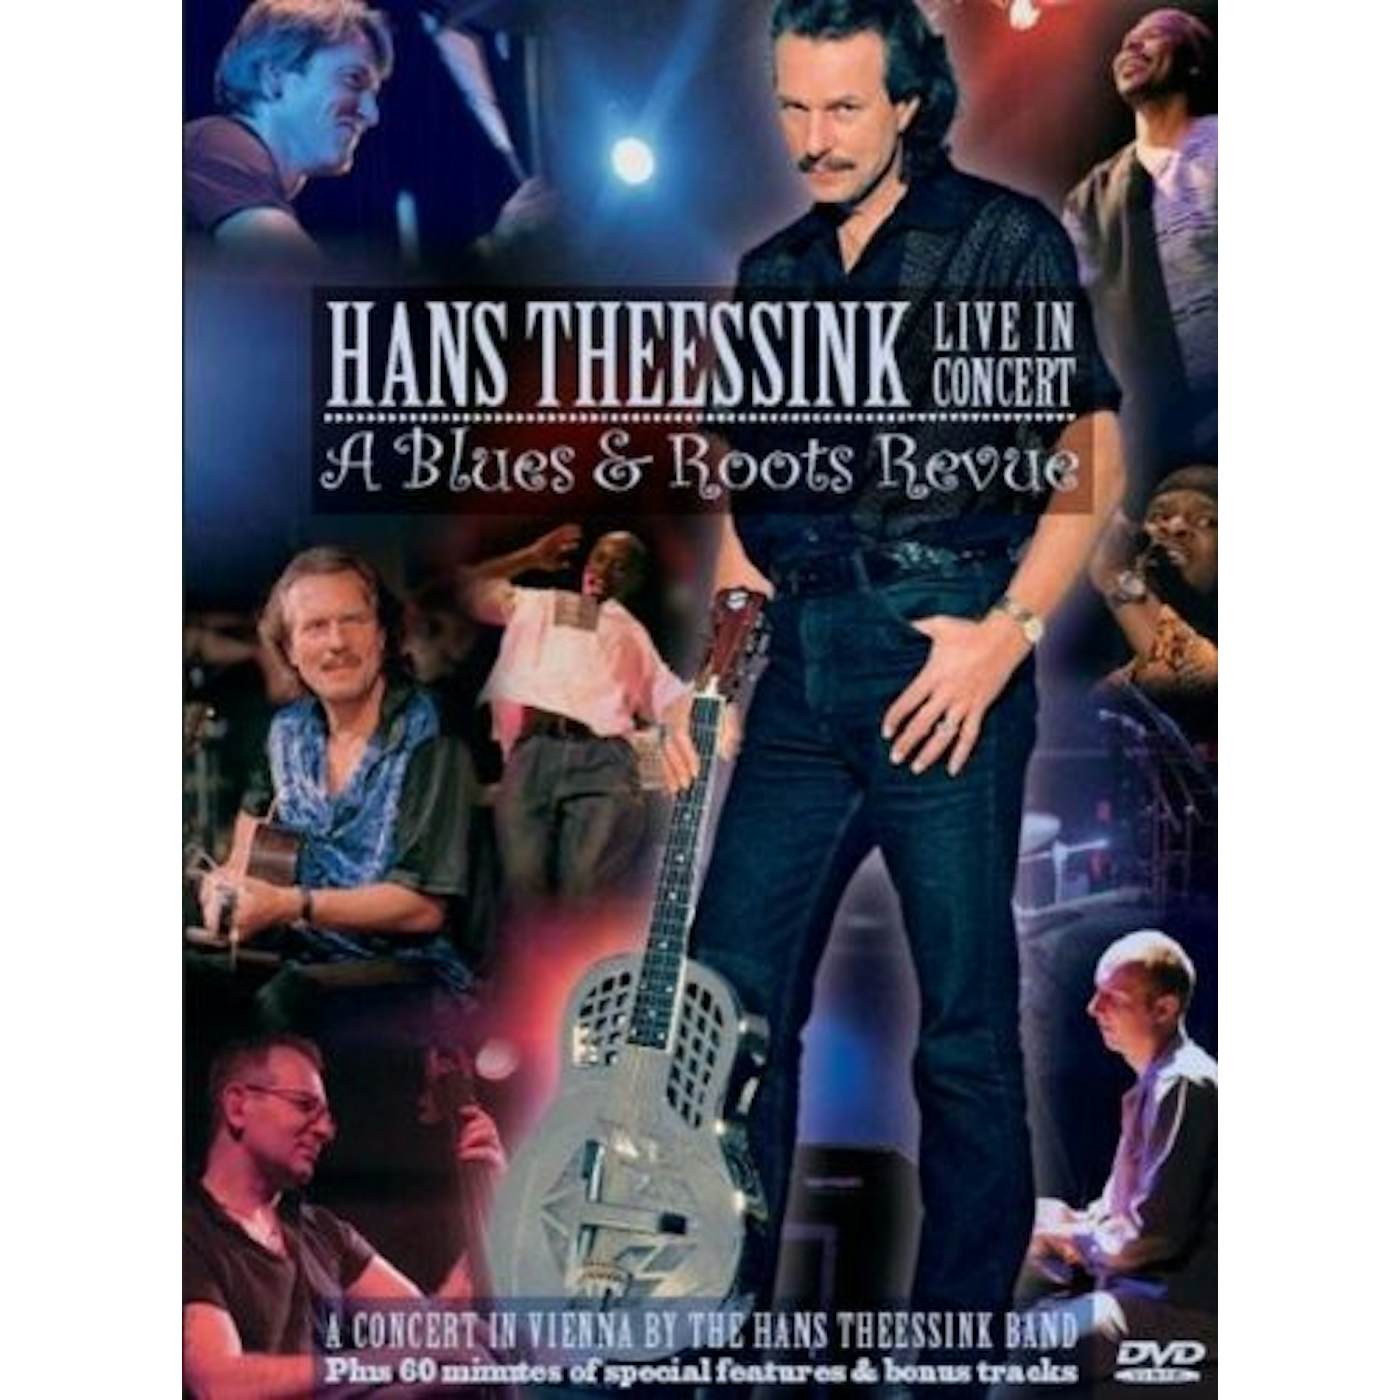 Hans Theessink LIVE IN CONCERT - A BLUES & ROOTS REVUE DVD